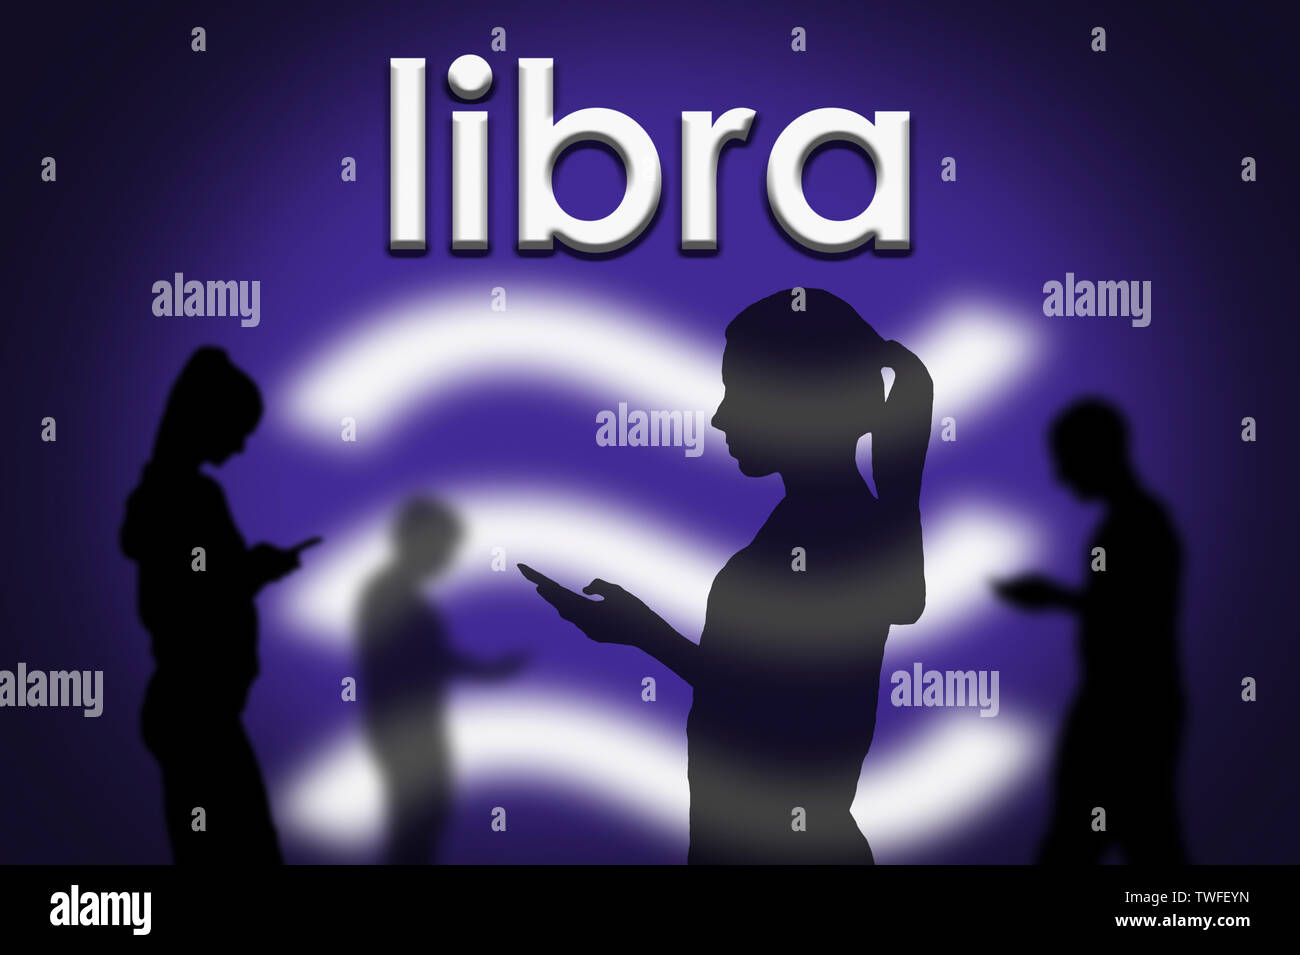 Silhouettes of people using Internet connected mobile devices to transfer money using Facebook's Libra cryptocurrency blockchain technology service. Stock Photo